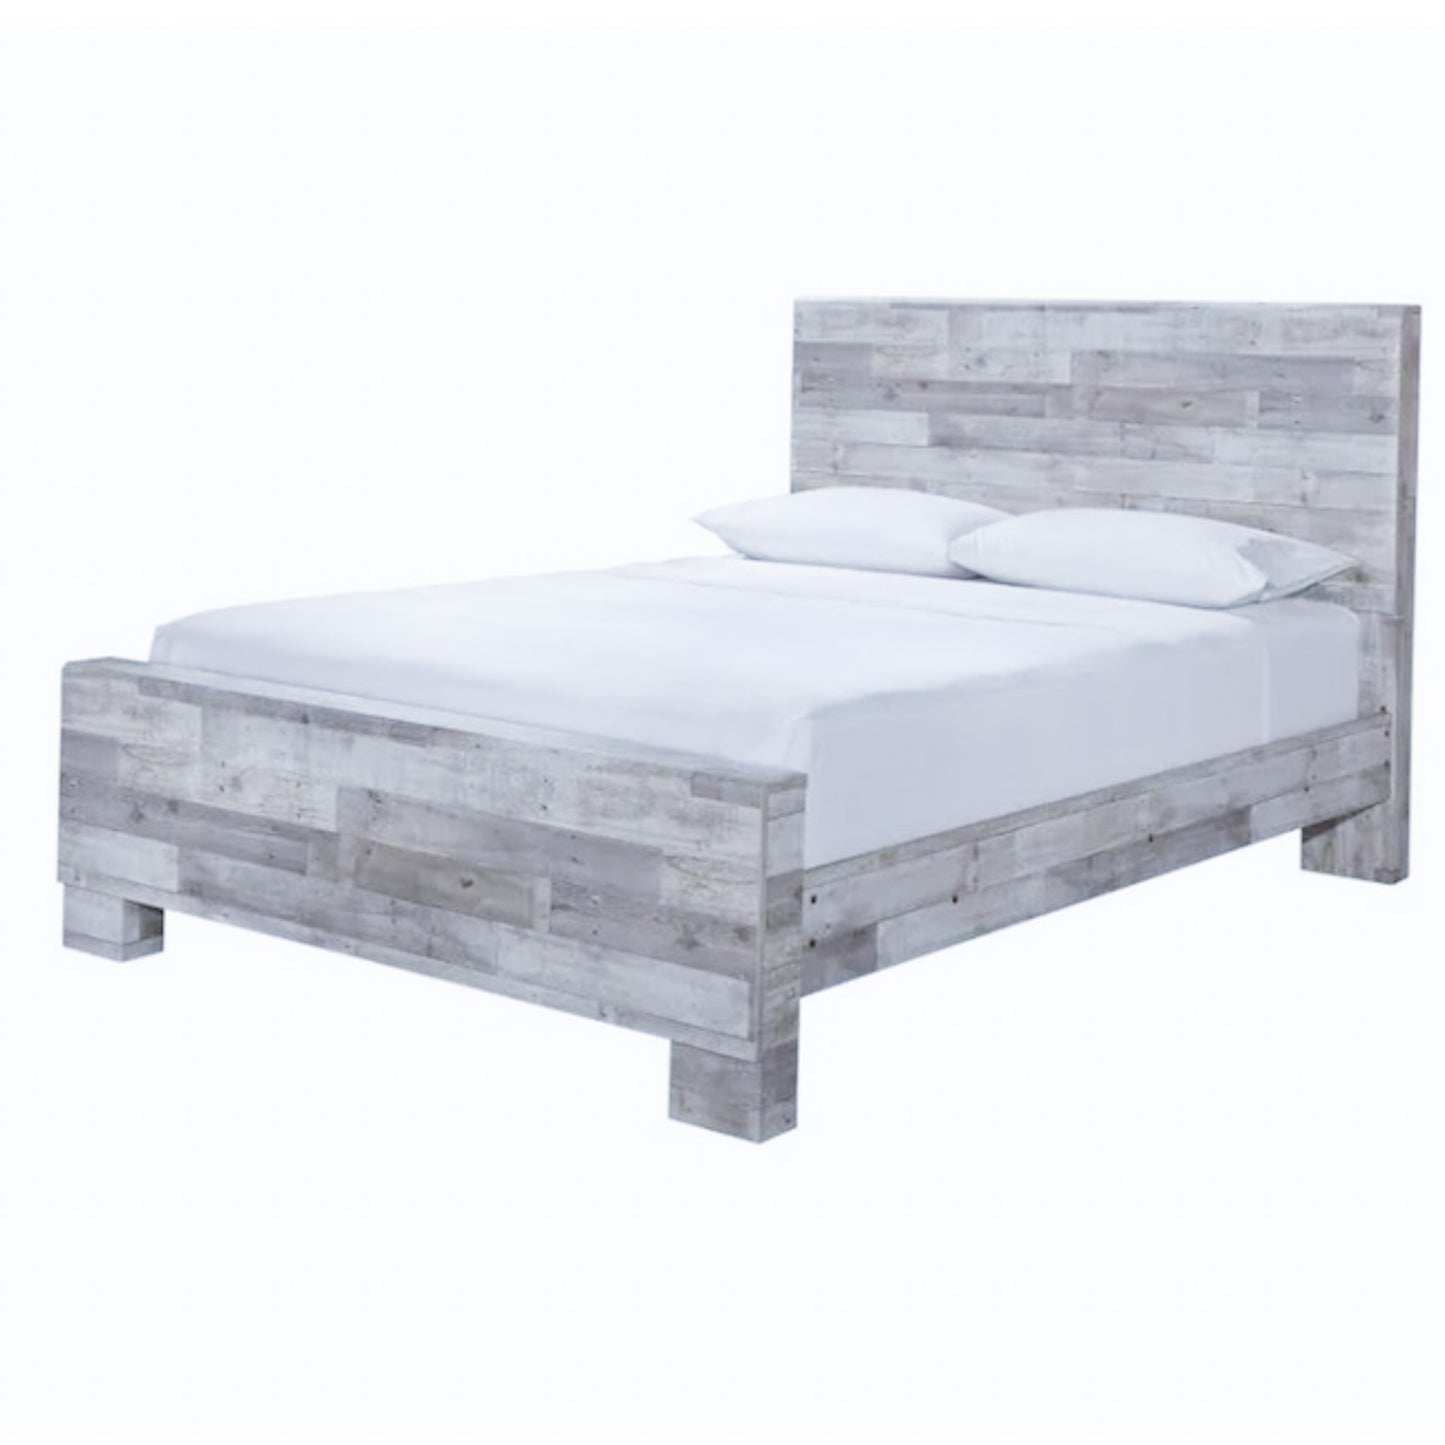 New Queen Head/Footboard Rustic Whitewash Bedframe and Mattress